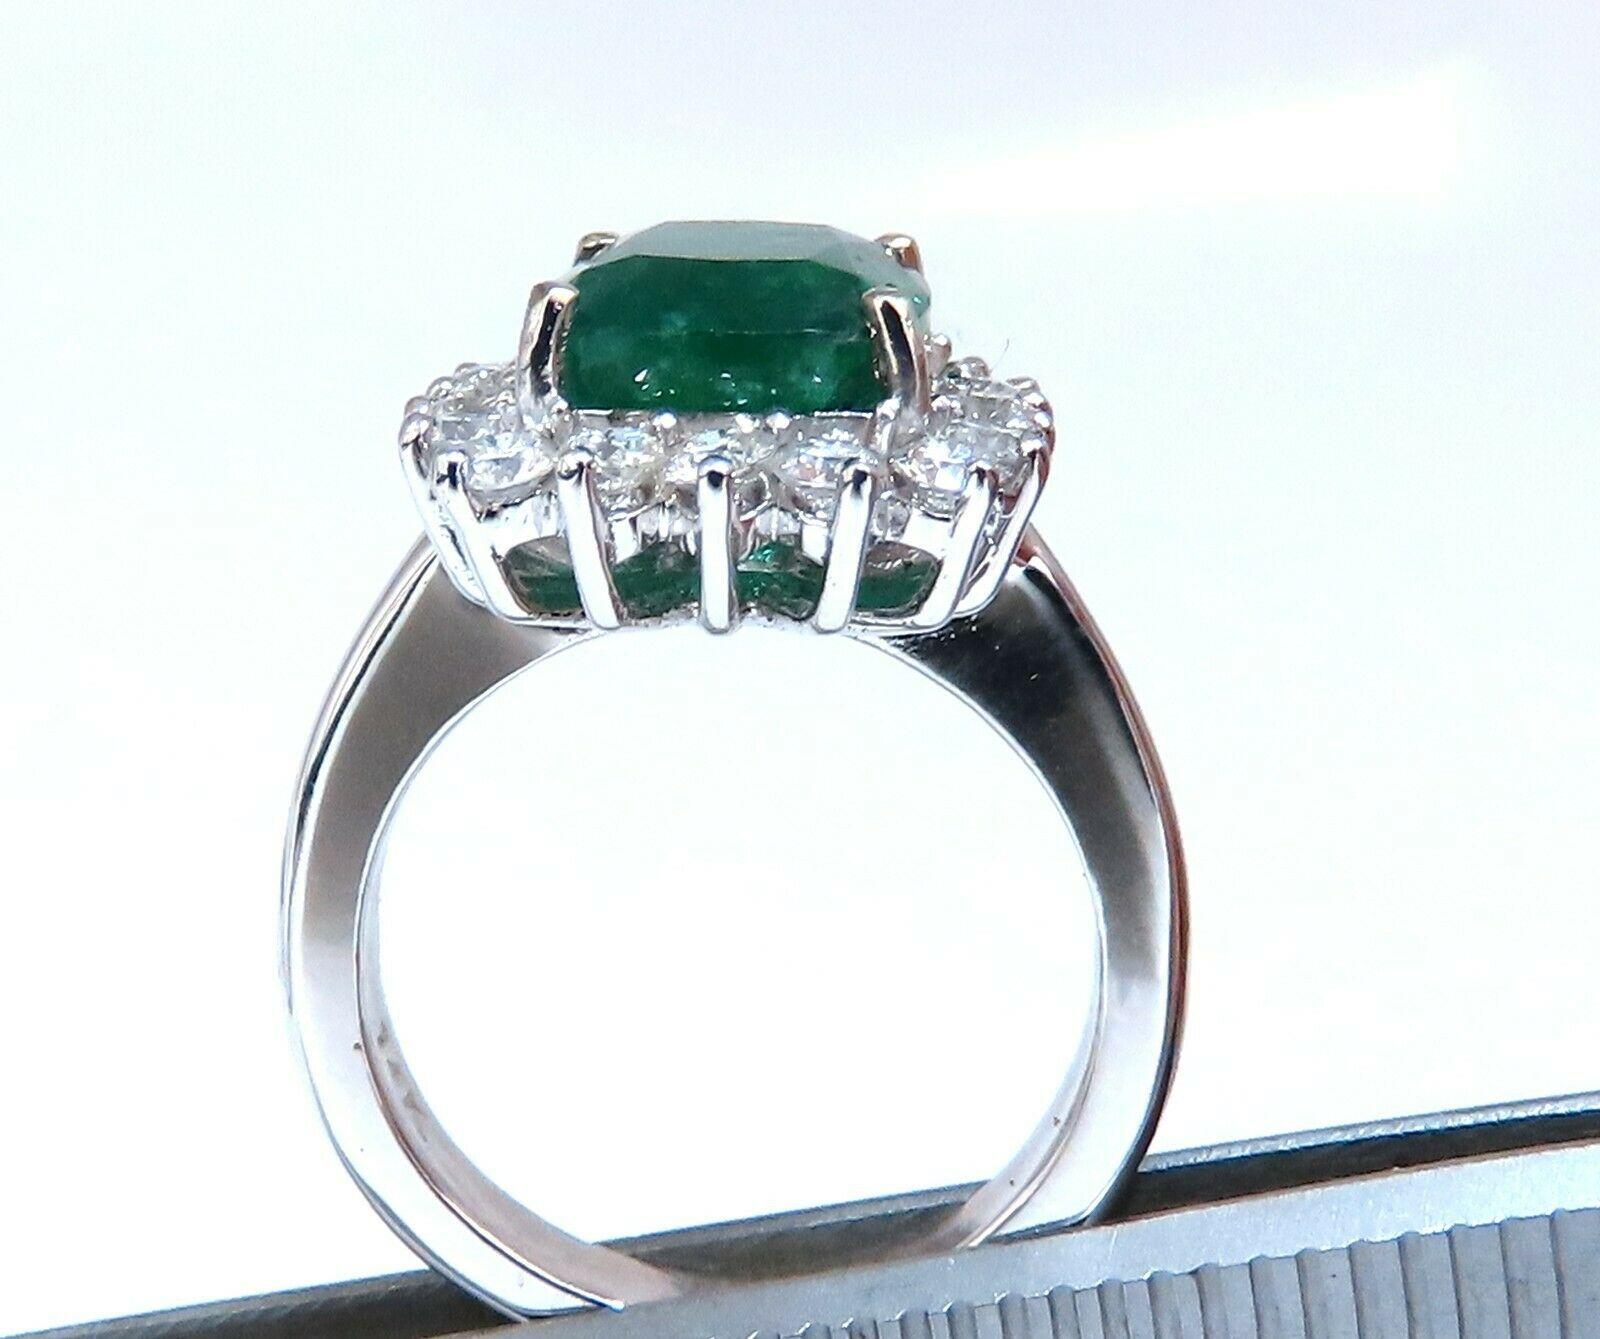 Emerald Cut GIA Certified 4.86ct Natural Green Emerald Diamonds Ring 14kt Halo Prime For Sale